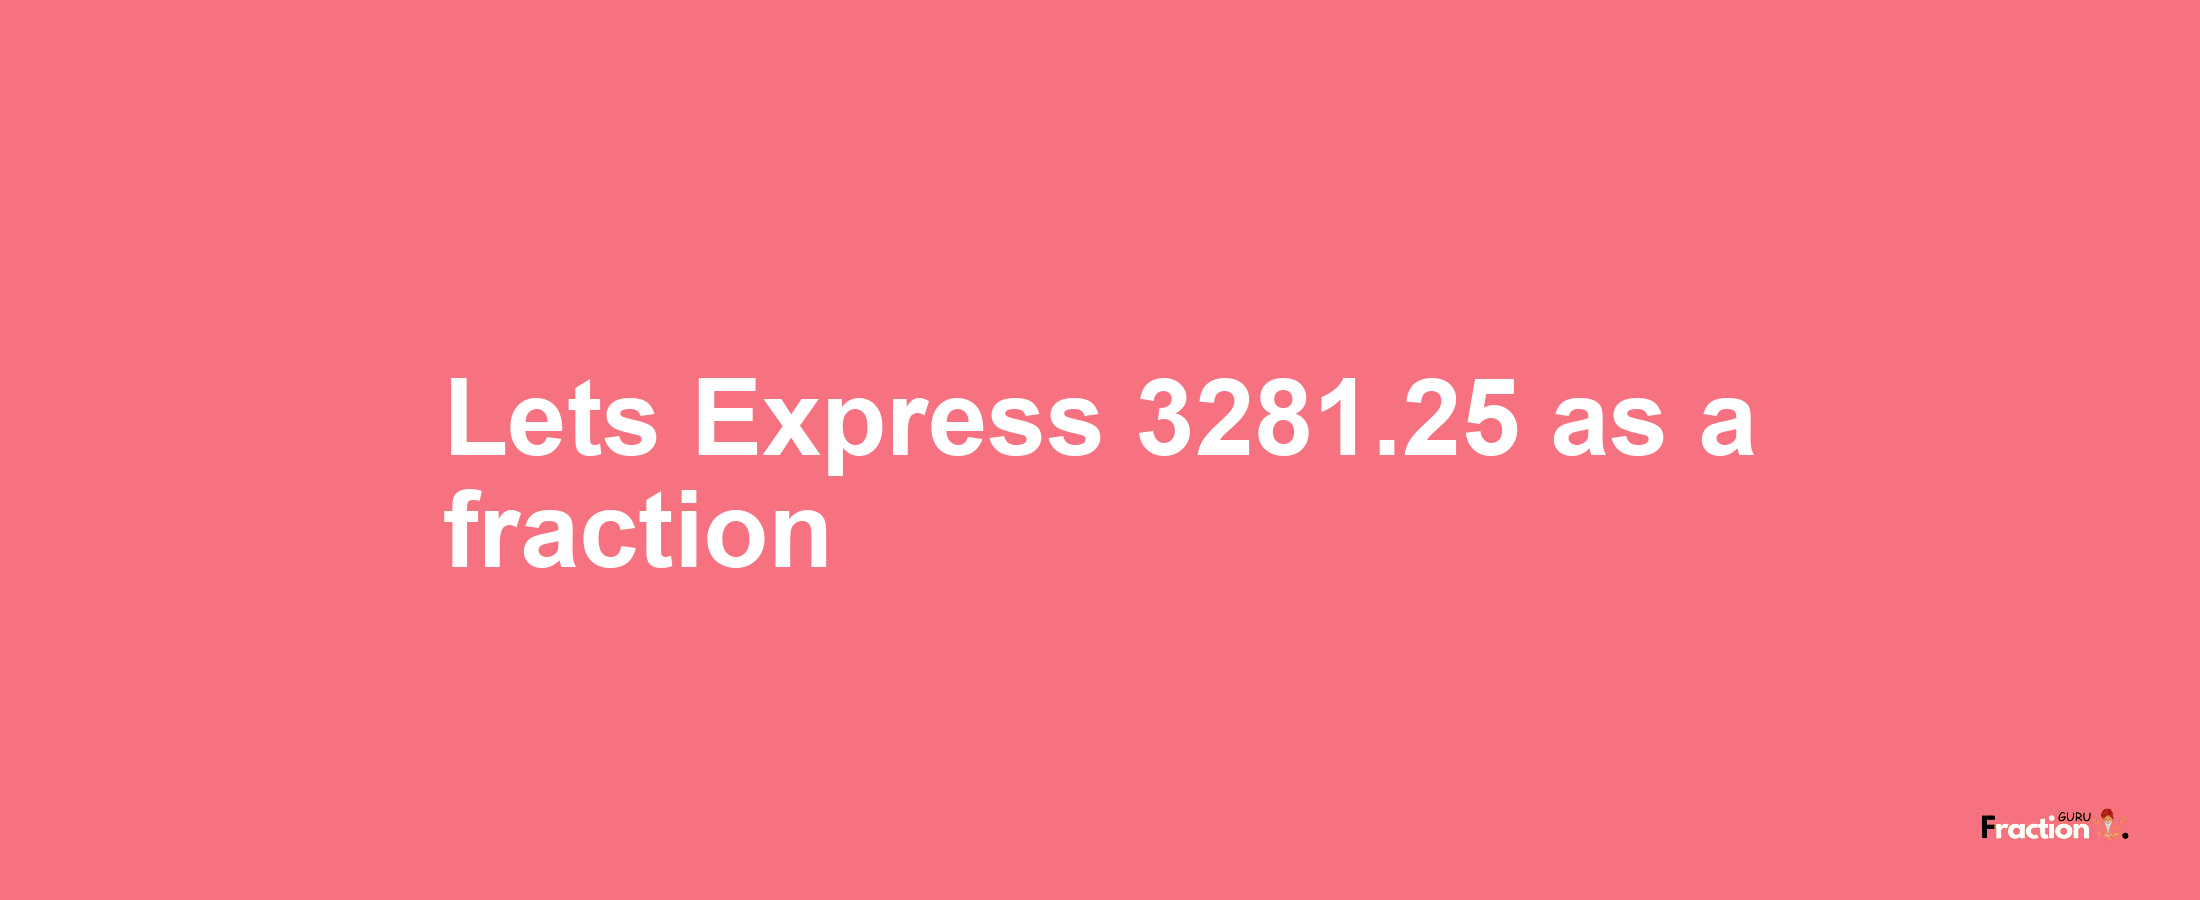 Lets Express 3281.25 as afraction